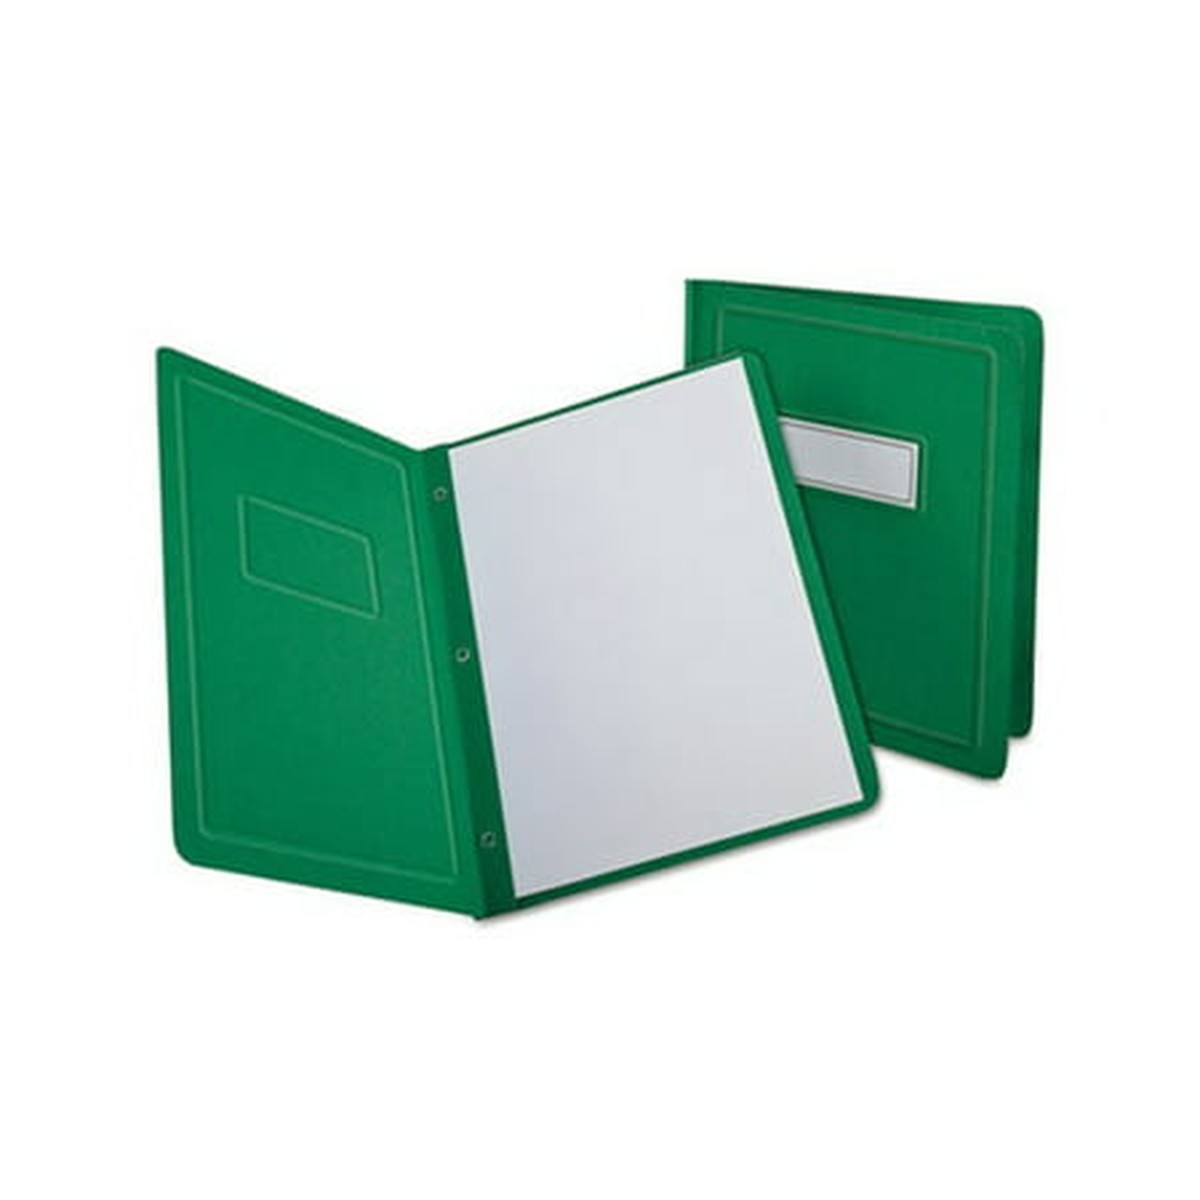 Report Cover, 3 Fasteners, Panel and Border Cover, Letter, Green, 25 per box